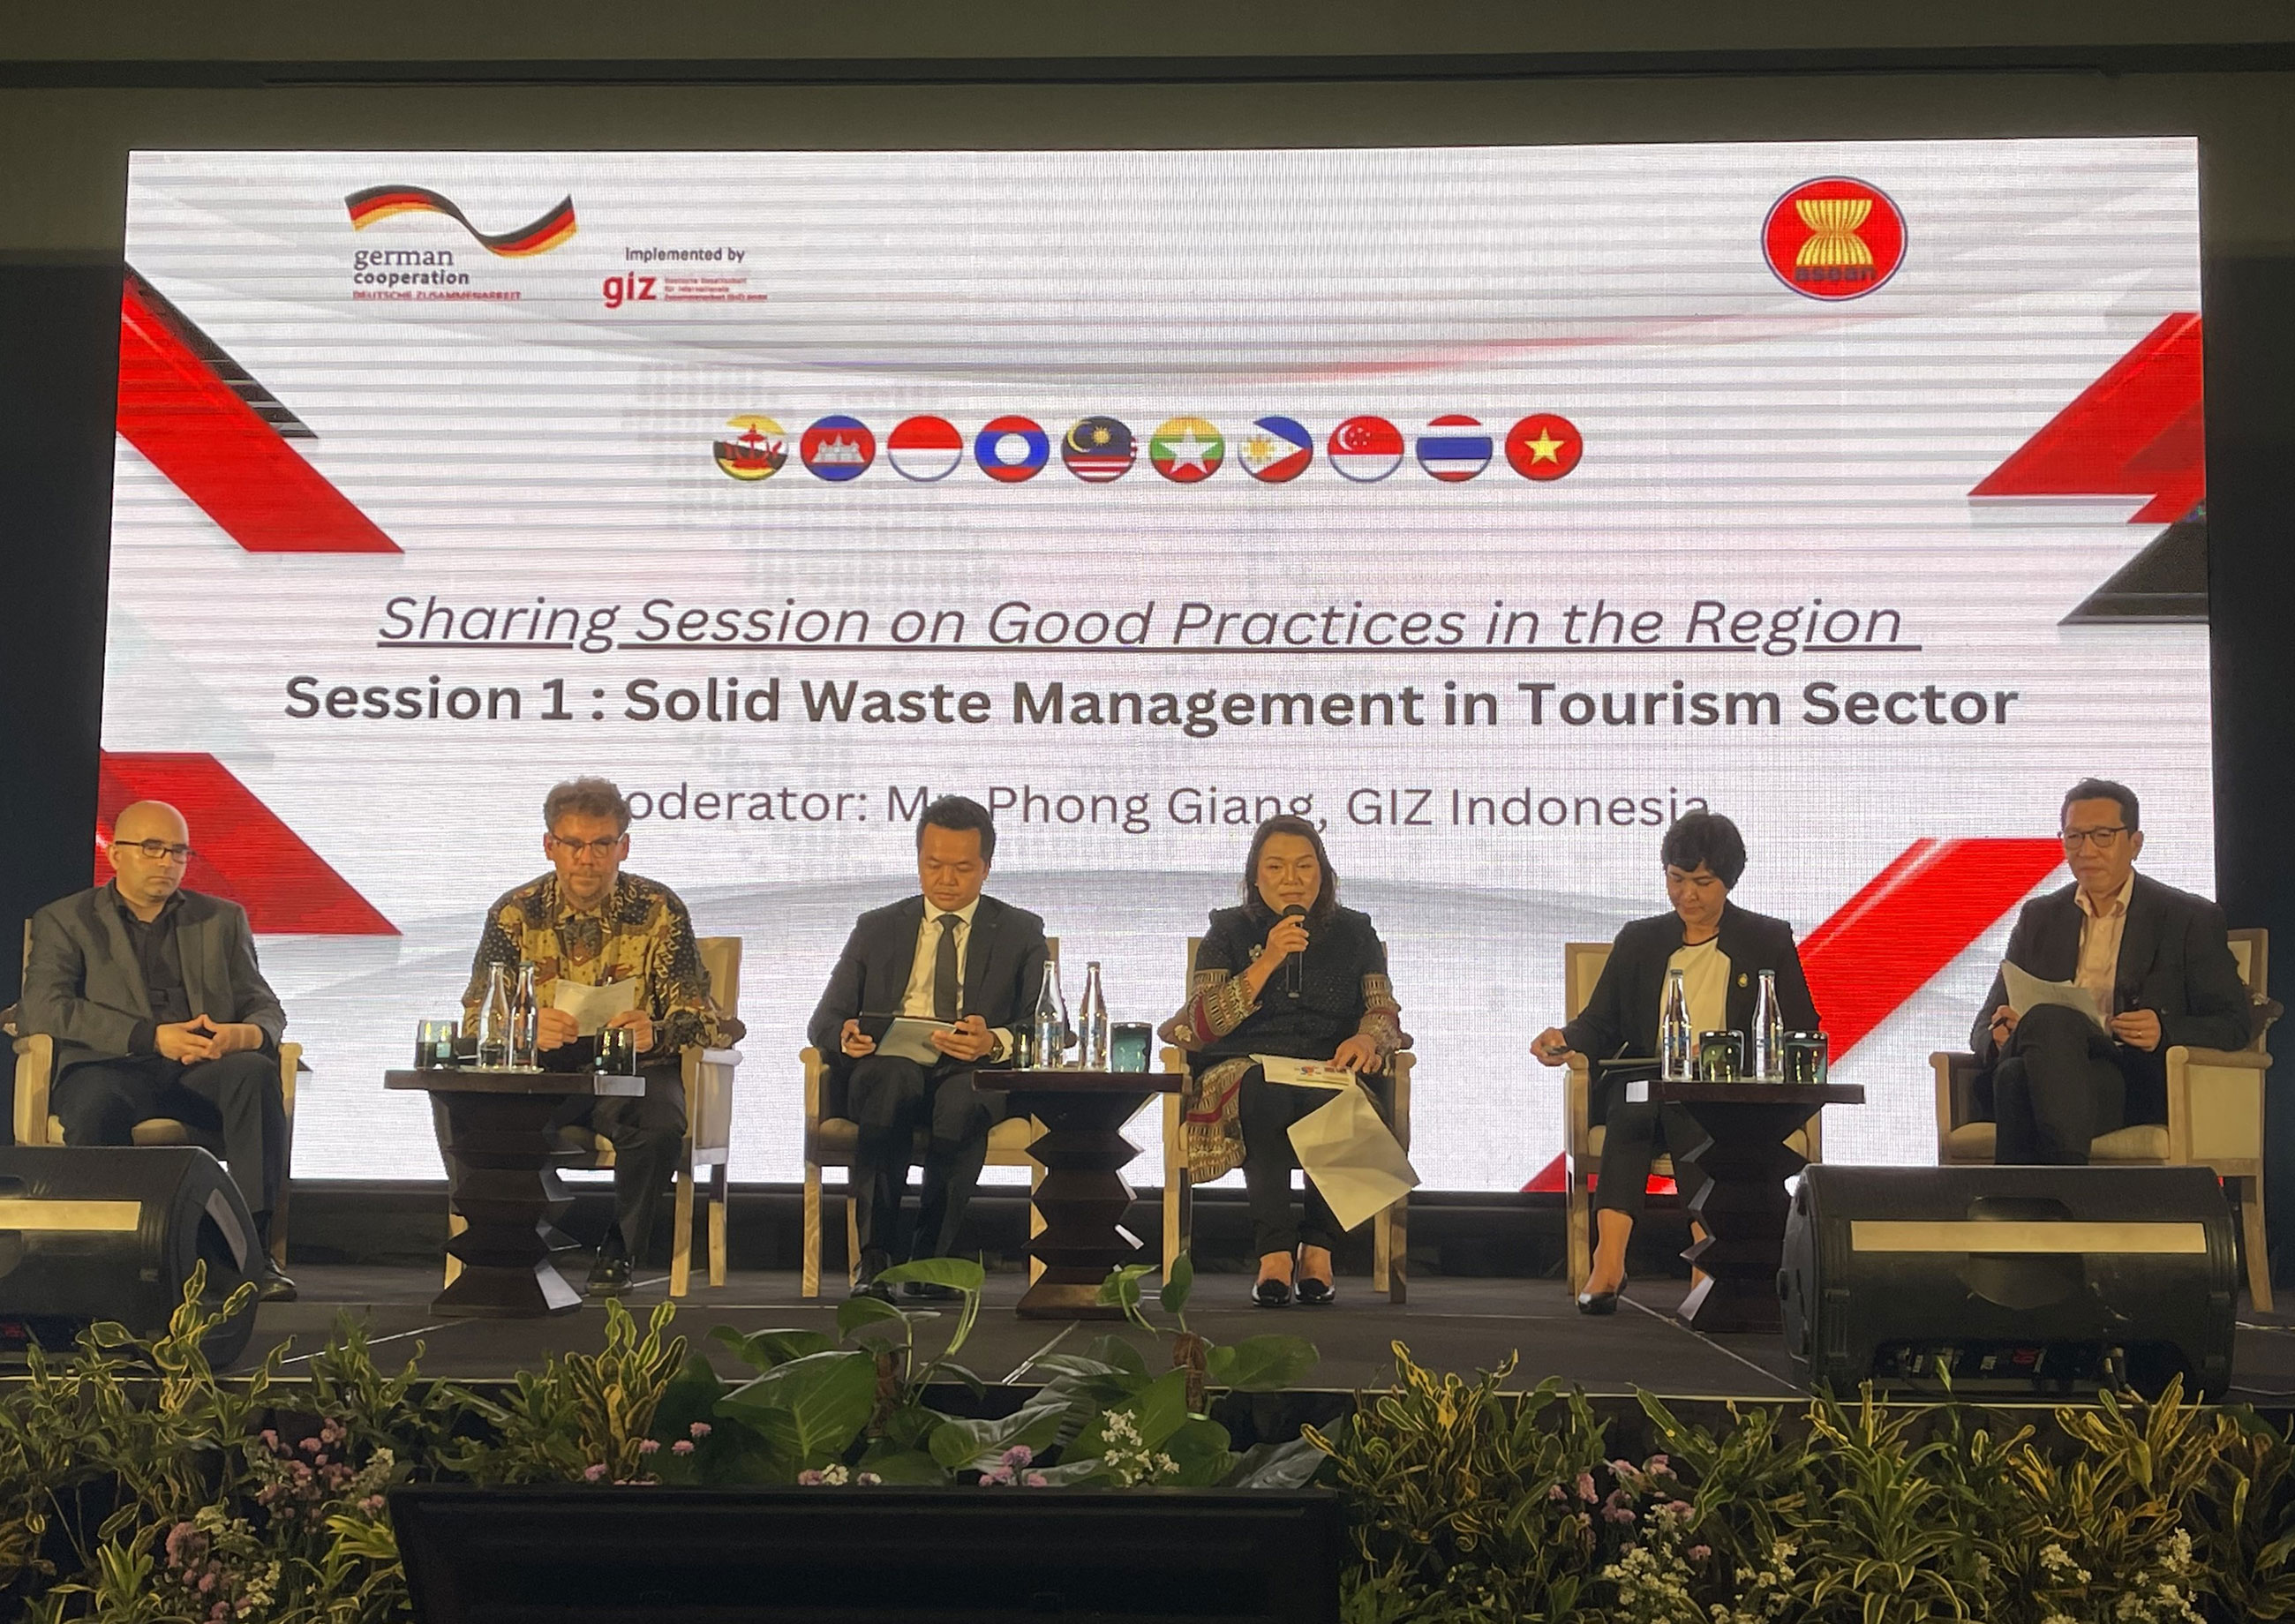 Dr. Anchalee Chumnum (third from right) presents good practices in municipal solid waste management in the tourism sector in Thailand at the AMUSE Regional Kick-Off Event on 30 March 2023 in Bali, Indonesia.